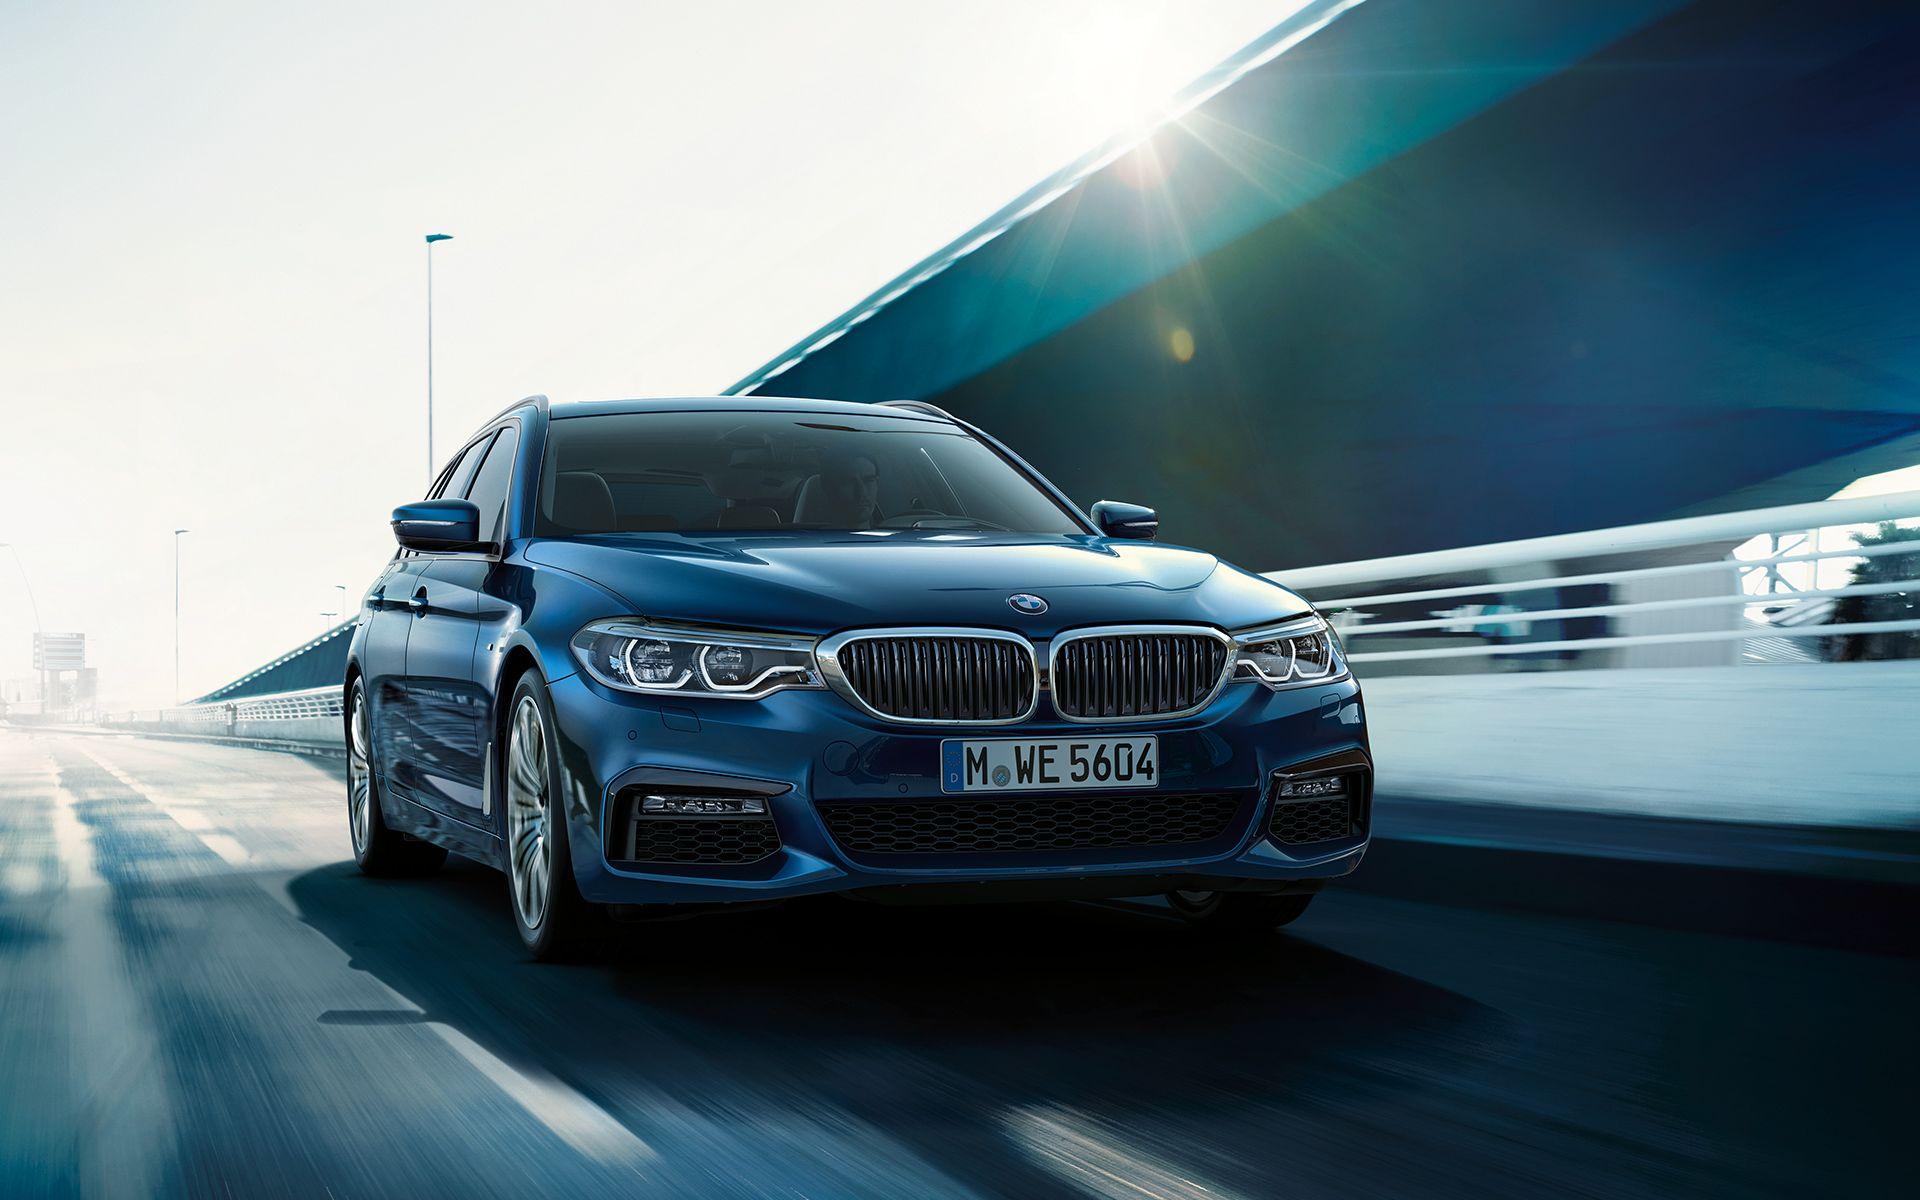 Gorgeous wallpaper of the new 2017 BMW 5 Series Touring